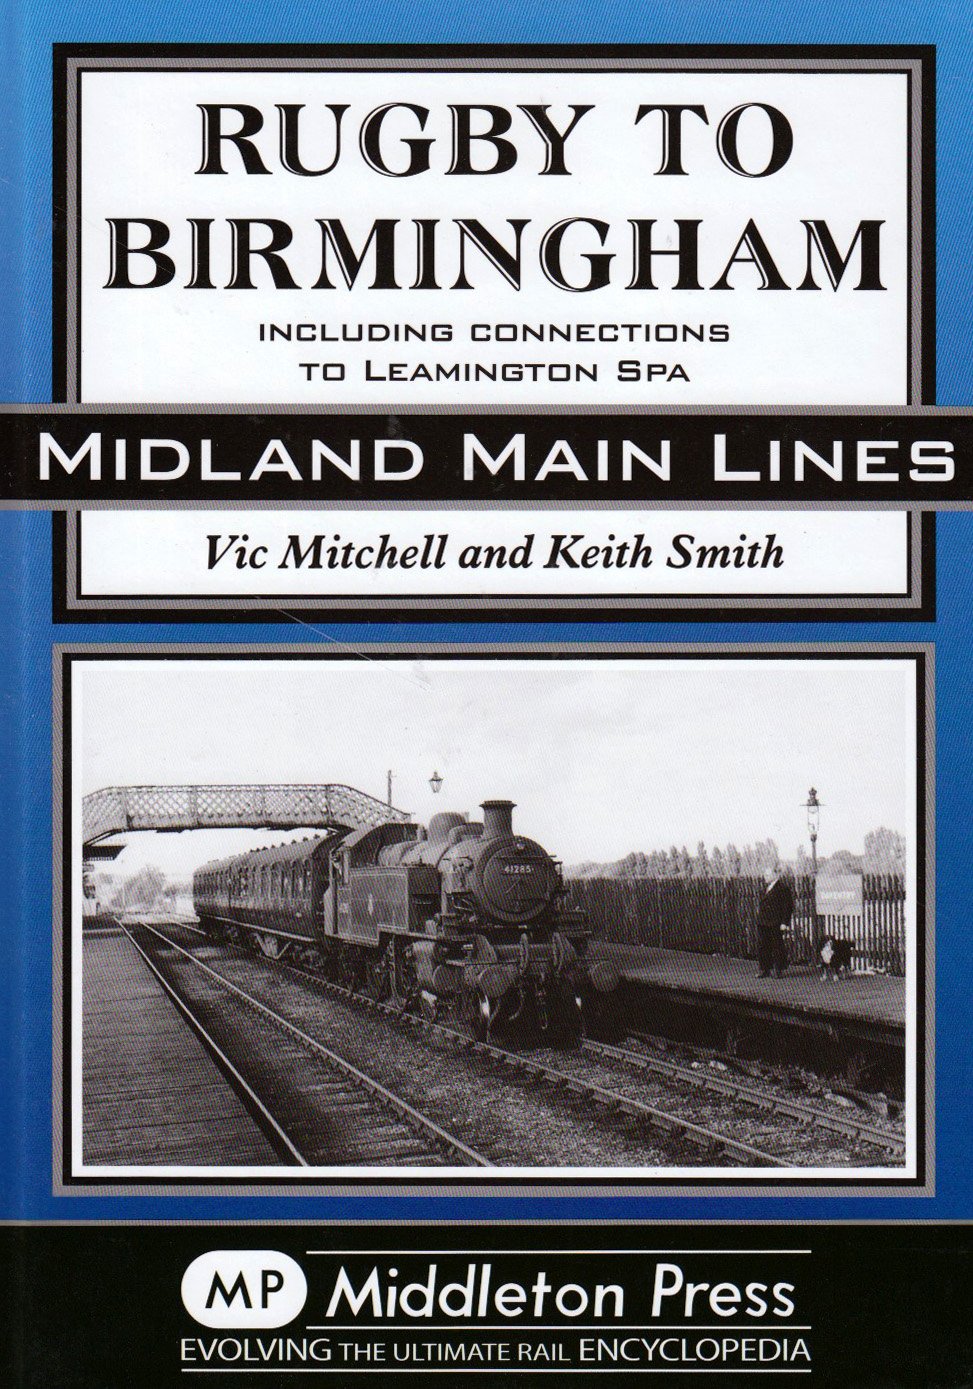 Midland Main Lines Rugby to Birmingham including connections to Leamington Spa